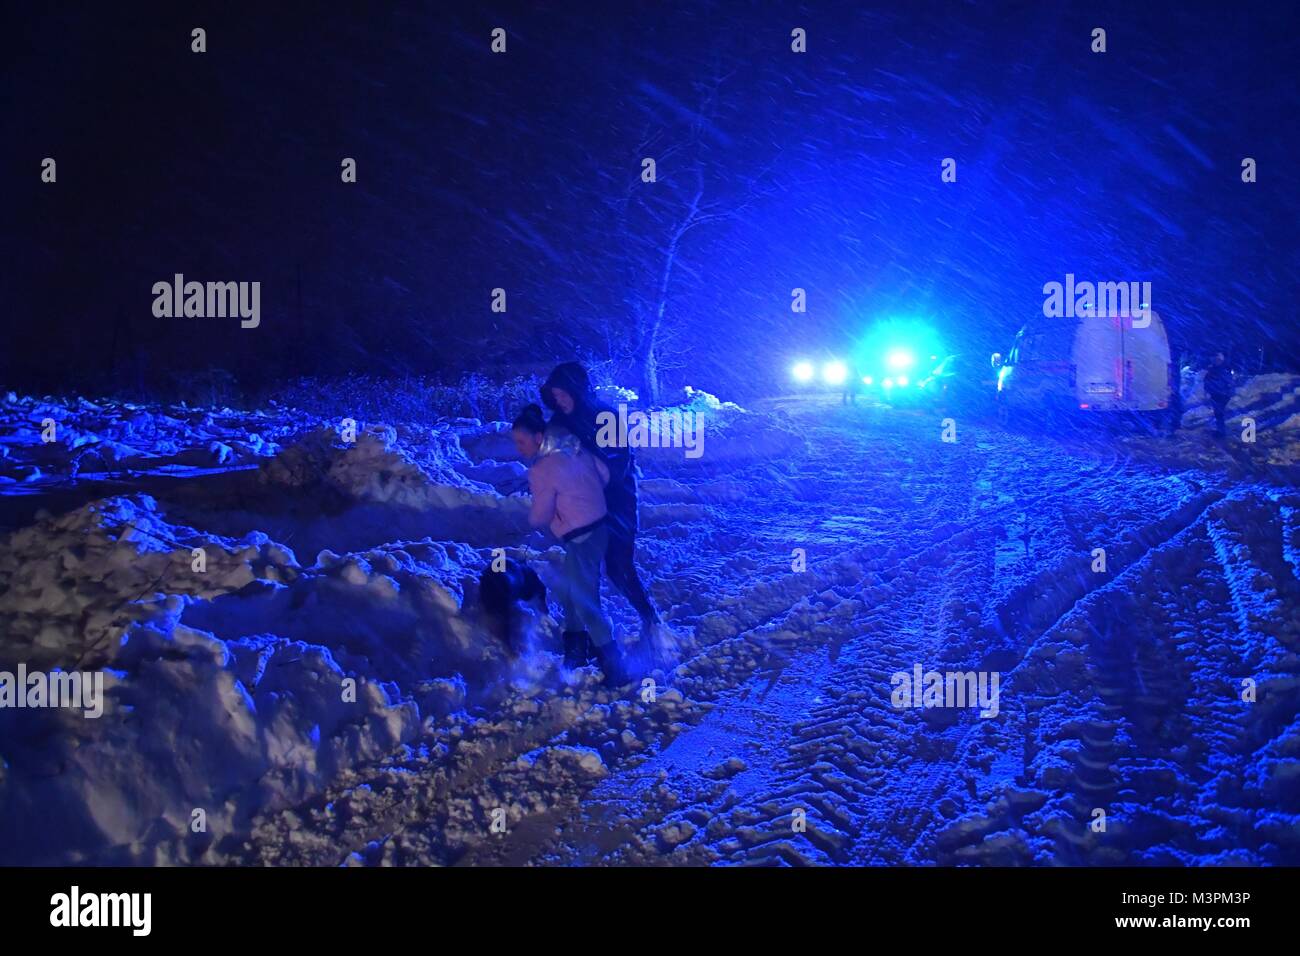 Moscow Region, Russia. February 11, 2018The crash site of a Saratov Airlines Antonov An-148 plane. The passenger plane with 71 people on board bound for the Ural city of Orsk crashed minutes after taking off from Domodedovo International Airport. Credit: Russian Look Ltd./Alamy Live News Stock Photo